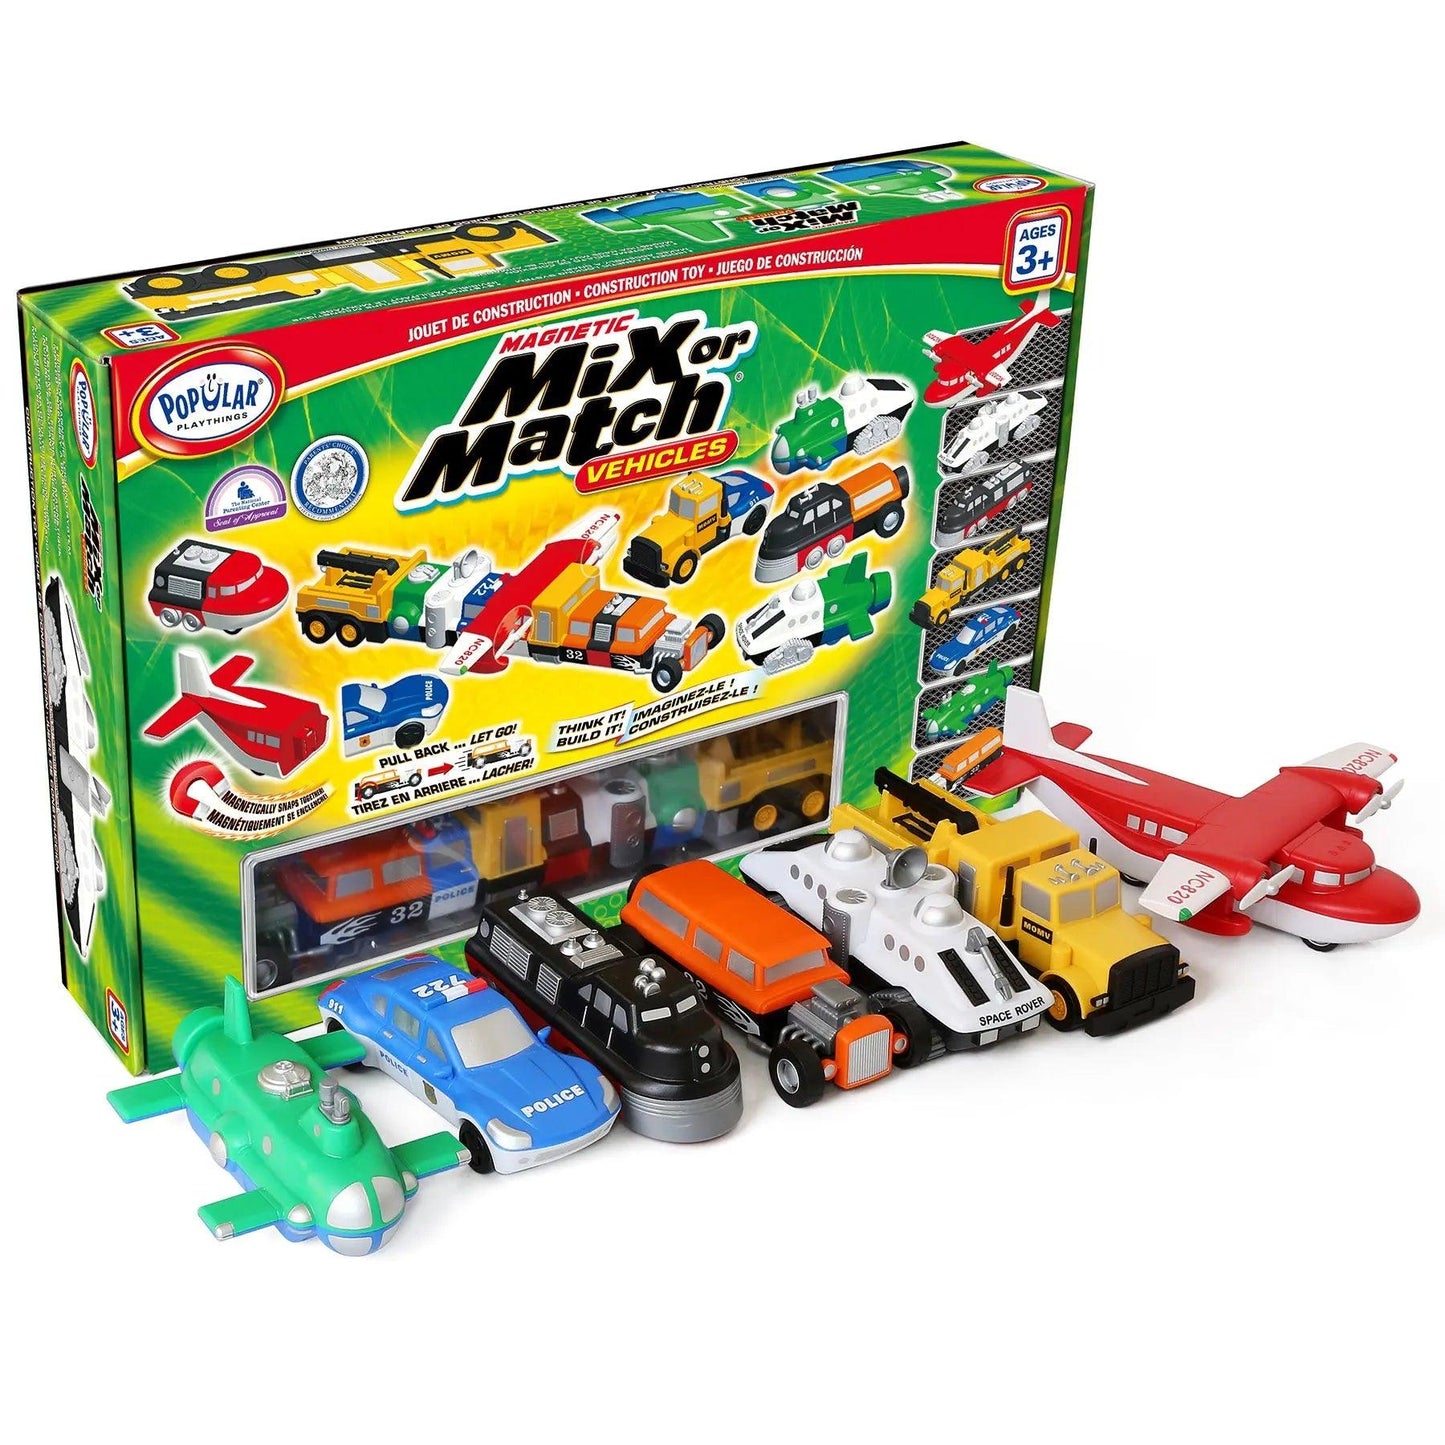 Magnetic Mix or Match Vehicles Deluxe Popular Playthings